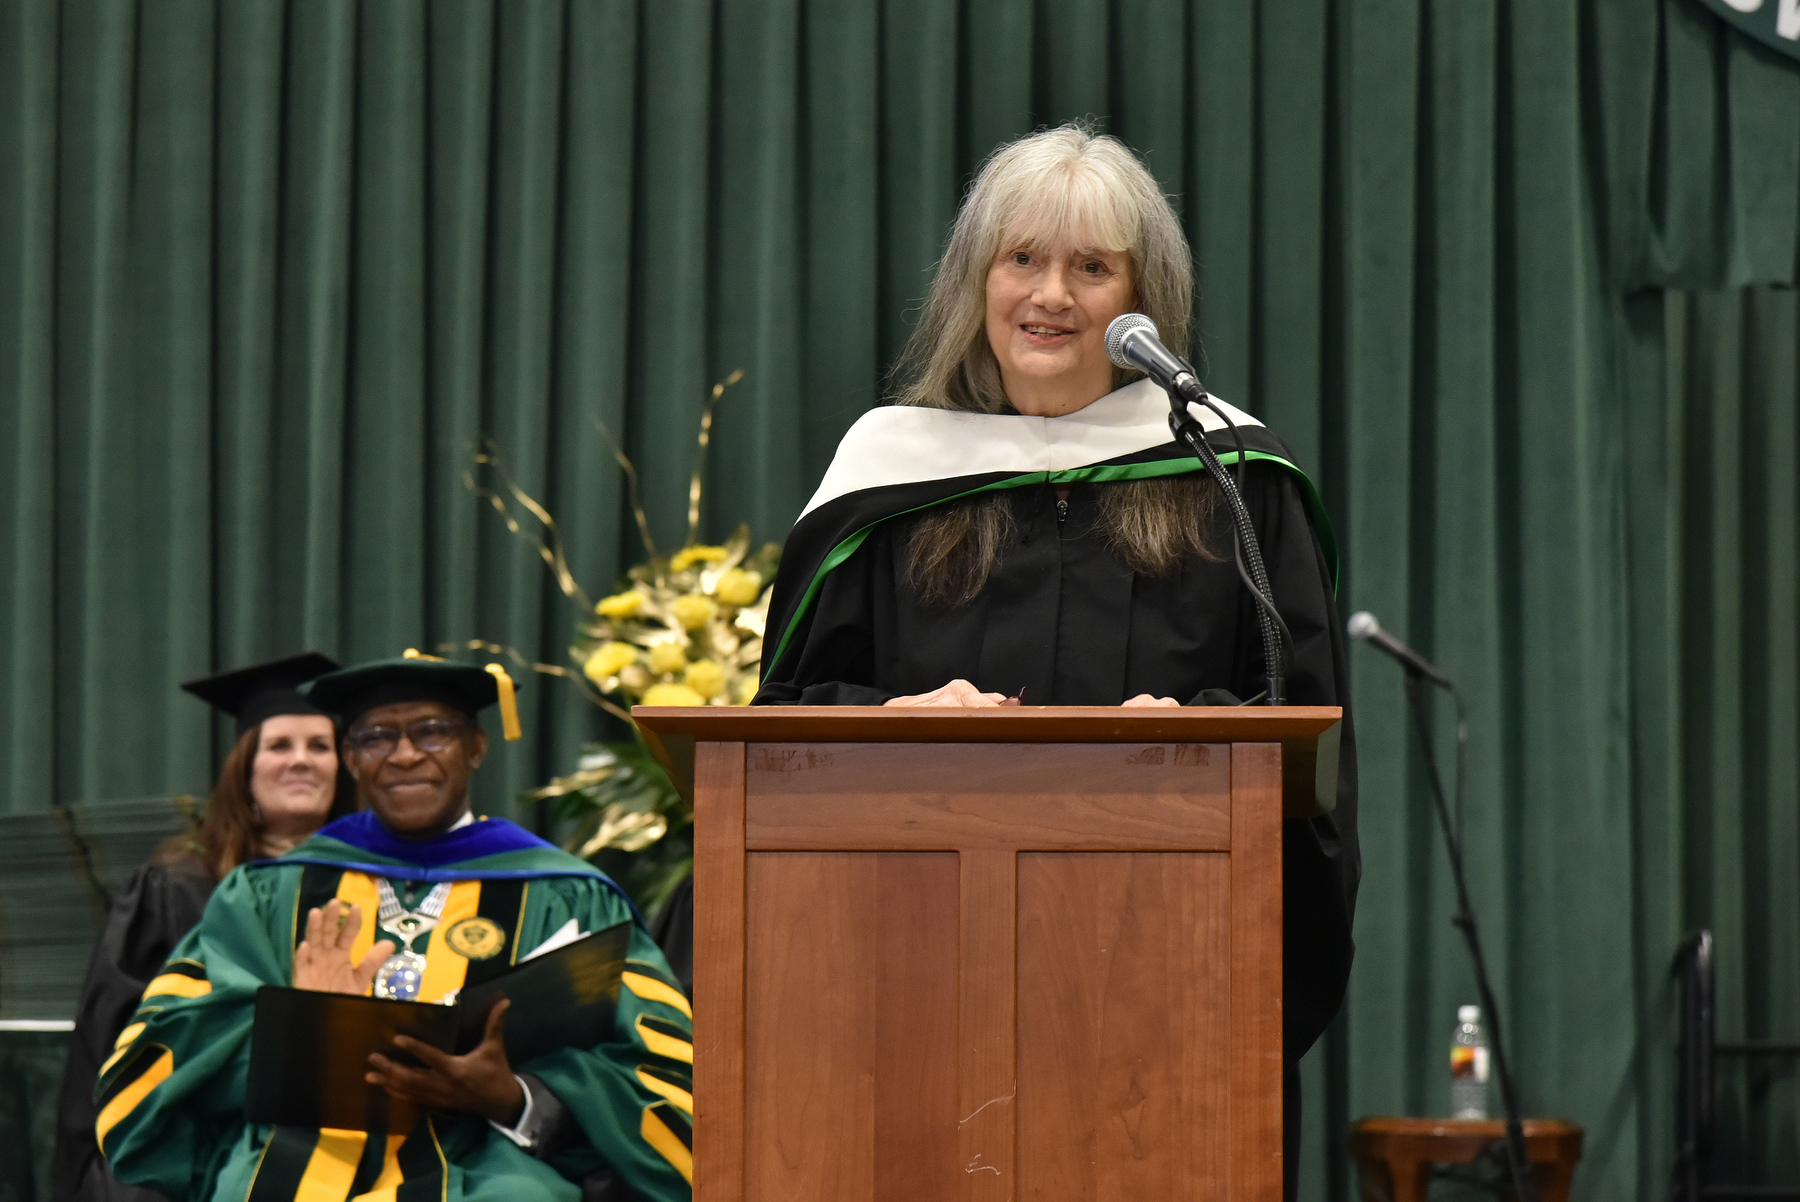 Virginia (Ginny) Donohue, a 1988 Oswego graduate and founder of On Point for College, served as a Commencement speaker, offering impassioned words of encouragement to the graduates after receiving a State University of New York honorary doctorate degree on the Commencement platform. Donohue left a corporate career and founded On Point for College in April 1999 after eight years of helping students from a local homeless shelter to enroll in college. 